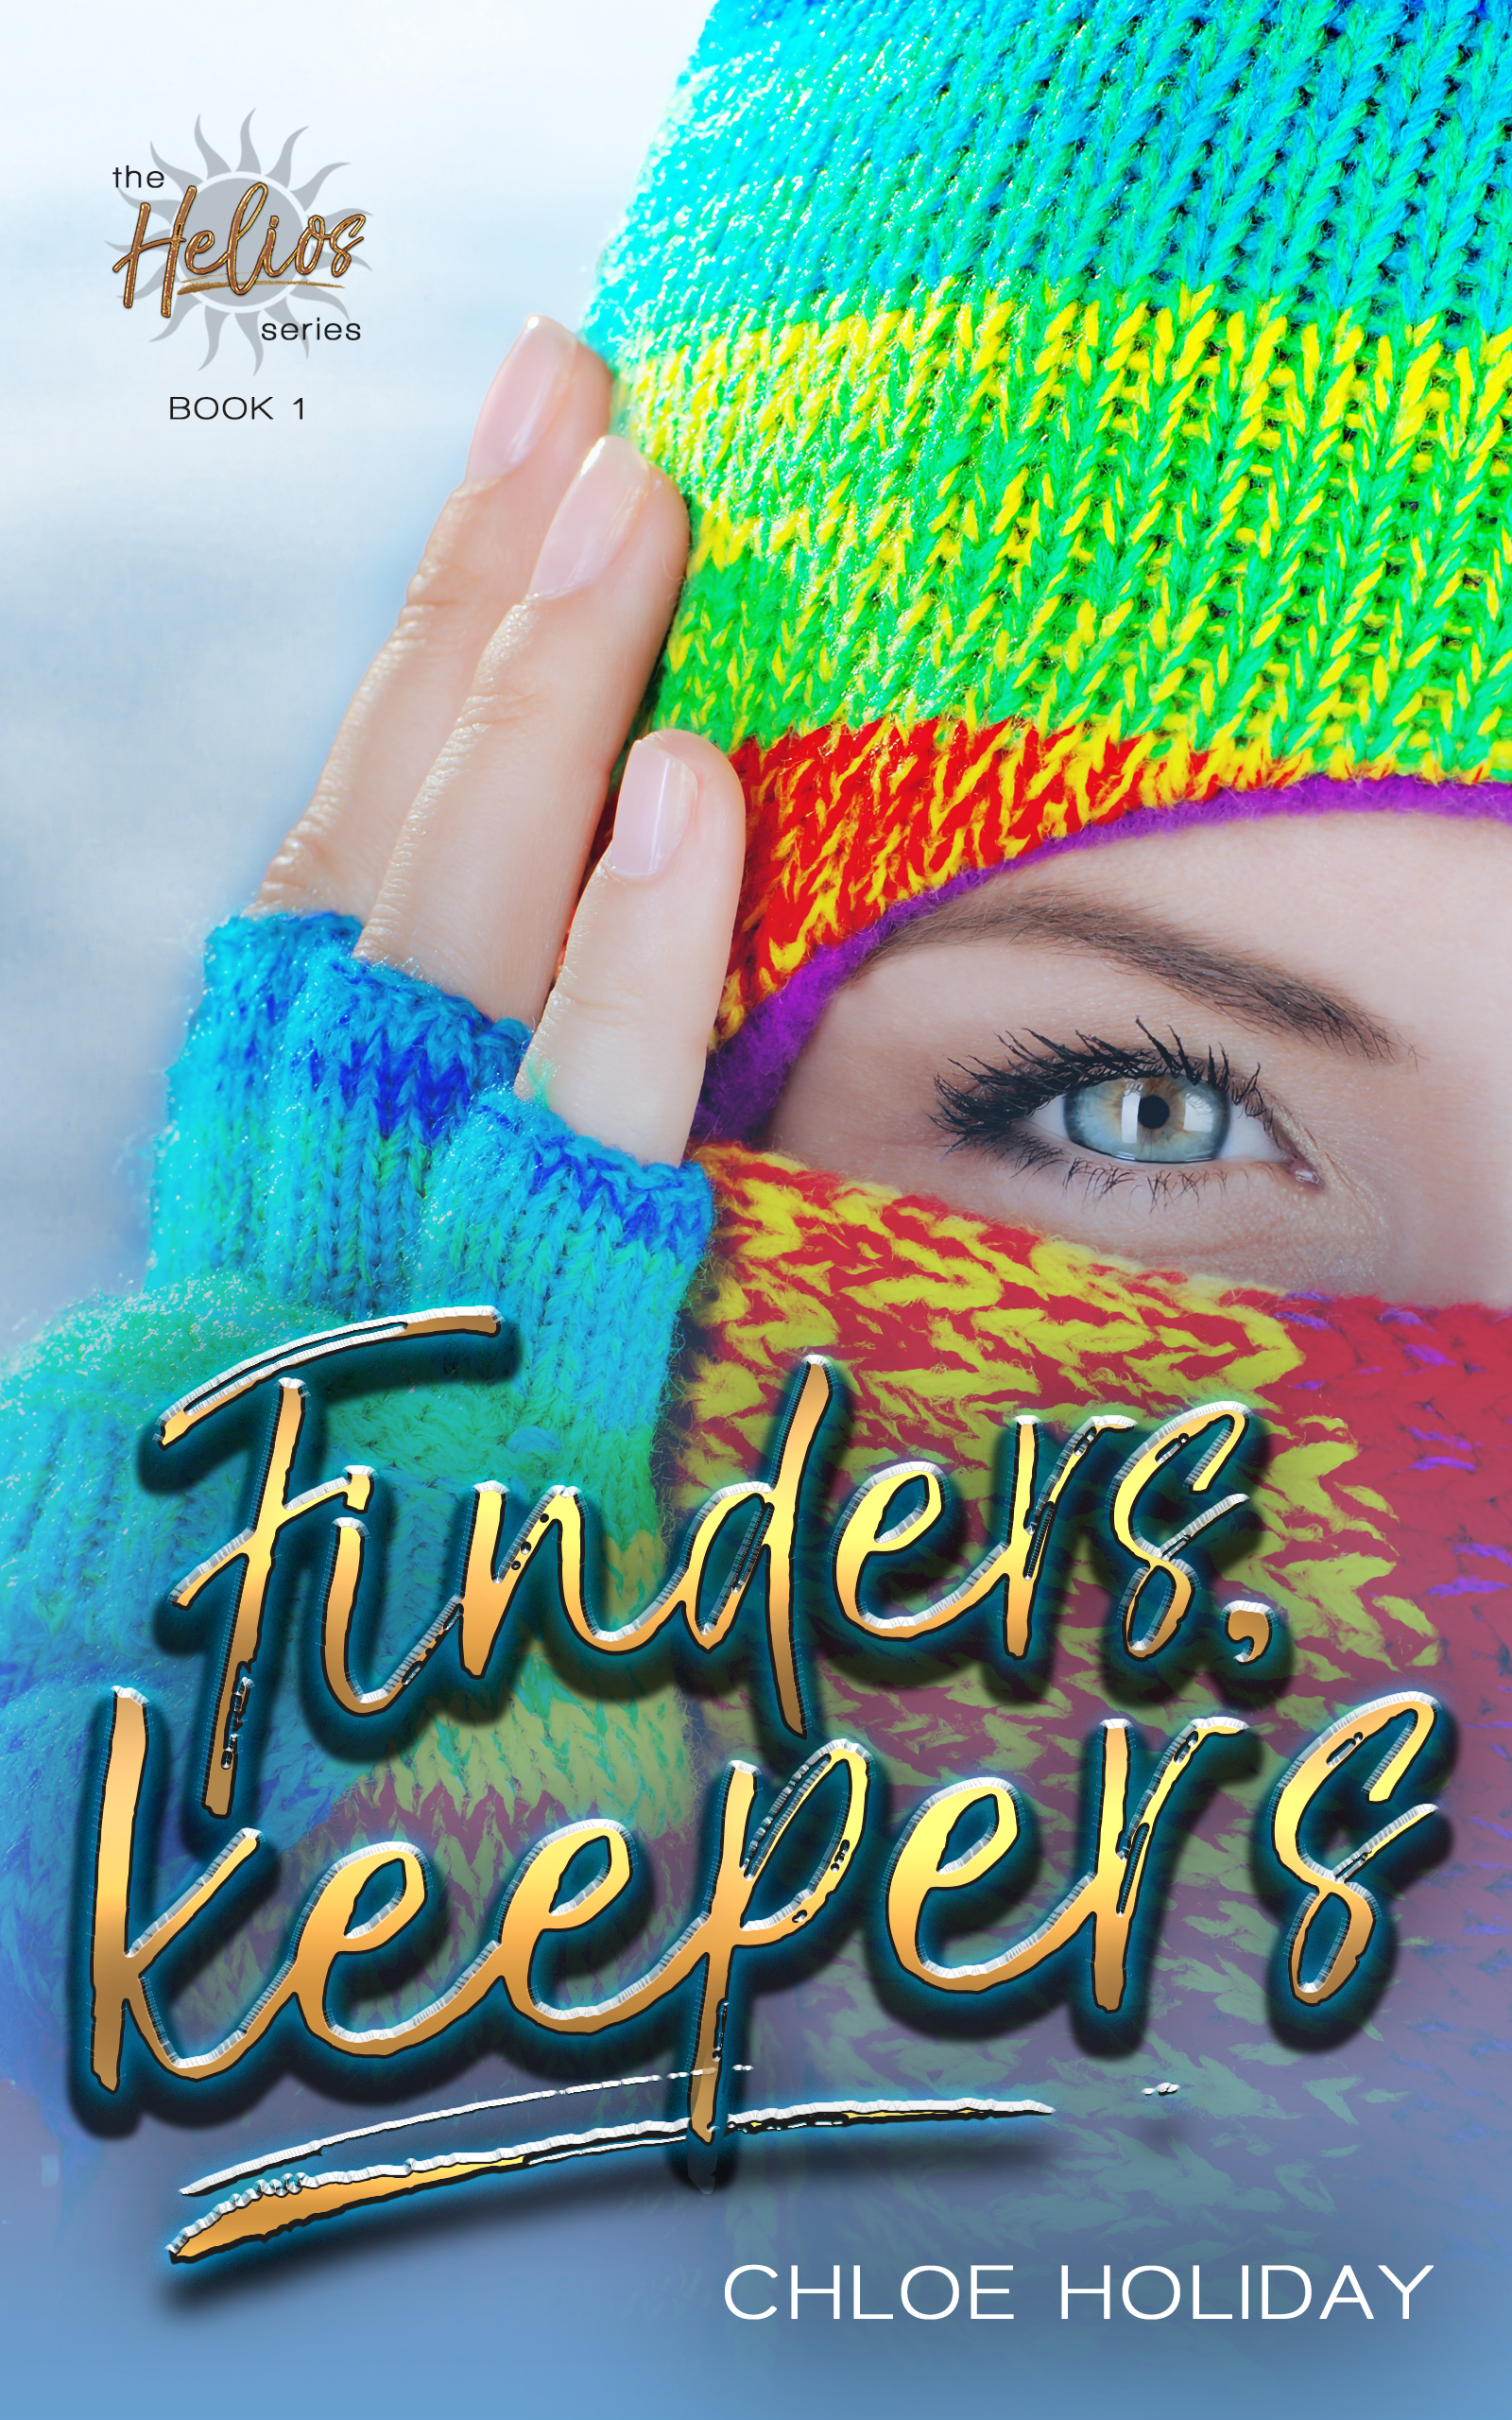 A live reading of Finders, Keepers by Chloe Holiday happens tonight